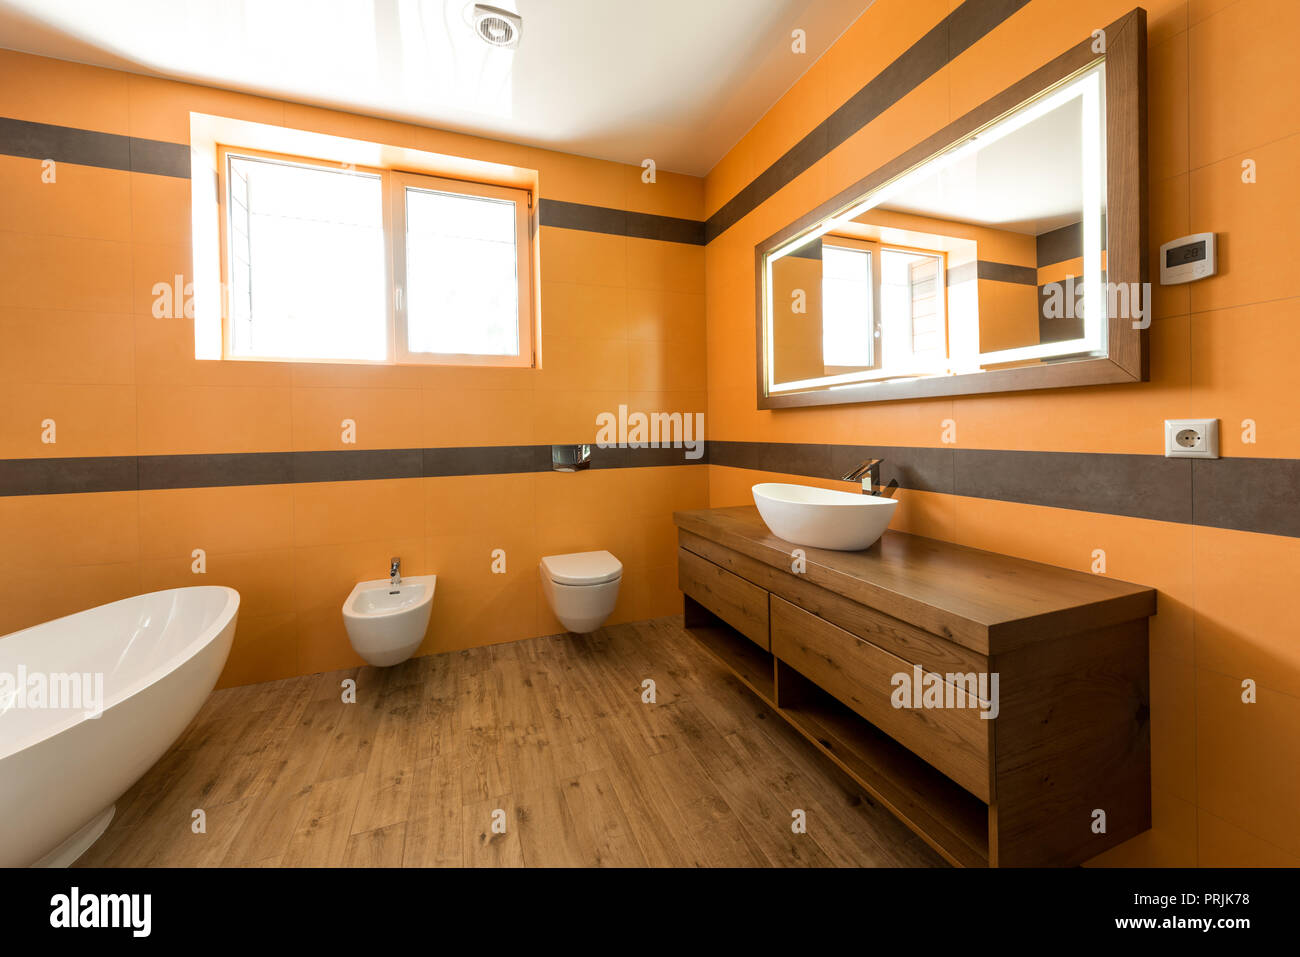 interior of modern bathroom in orange and white colors Stock Photo